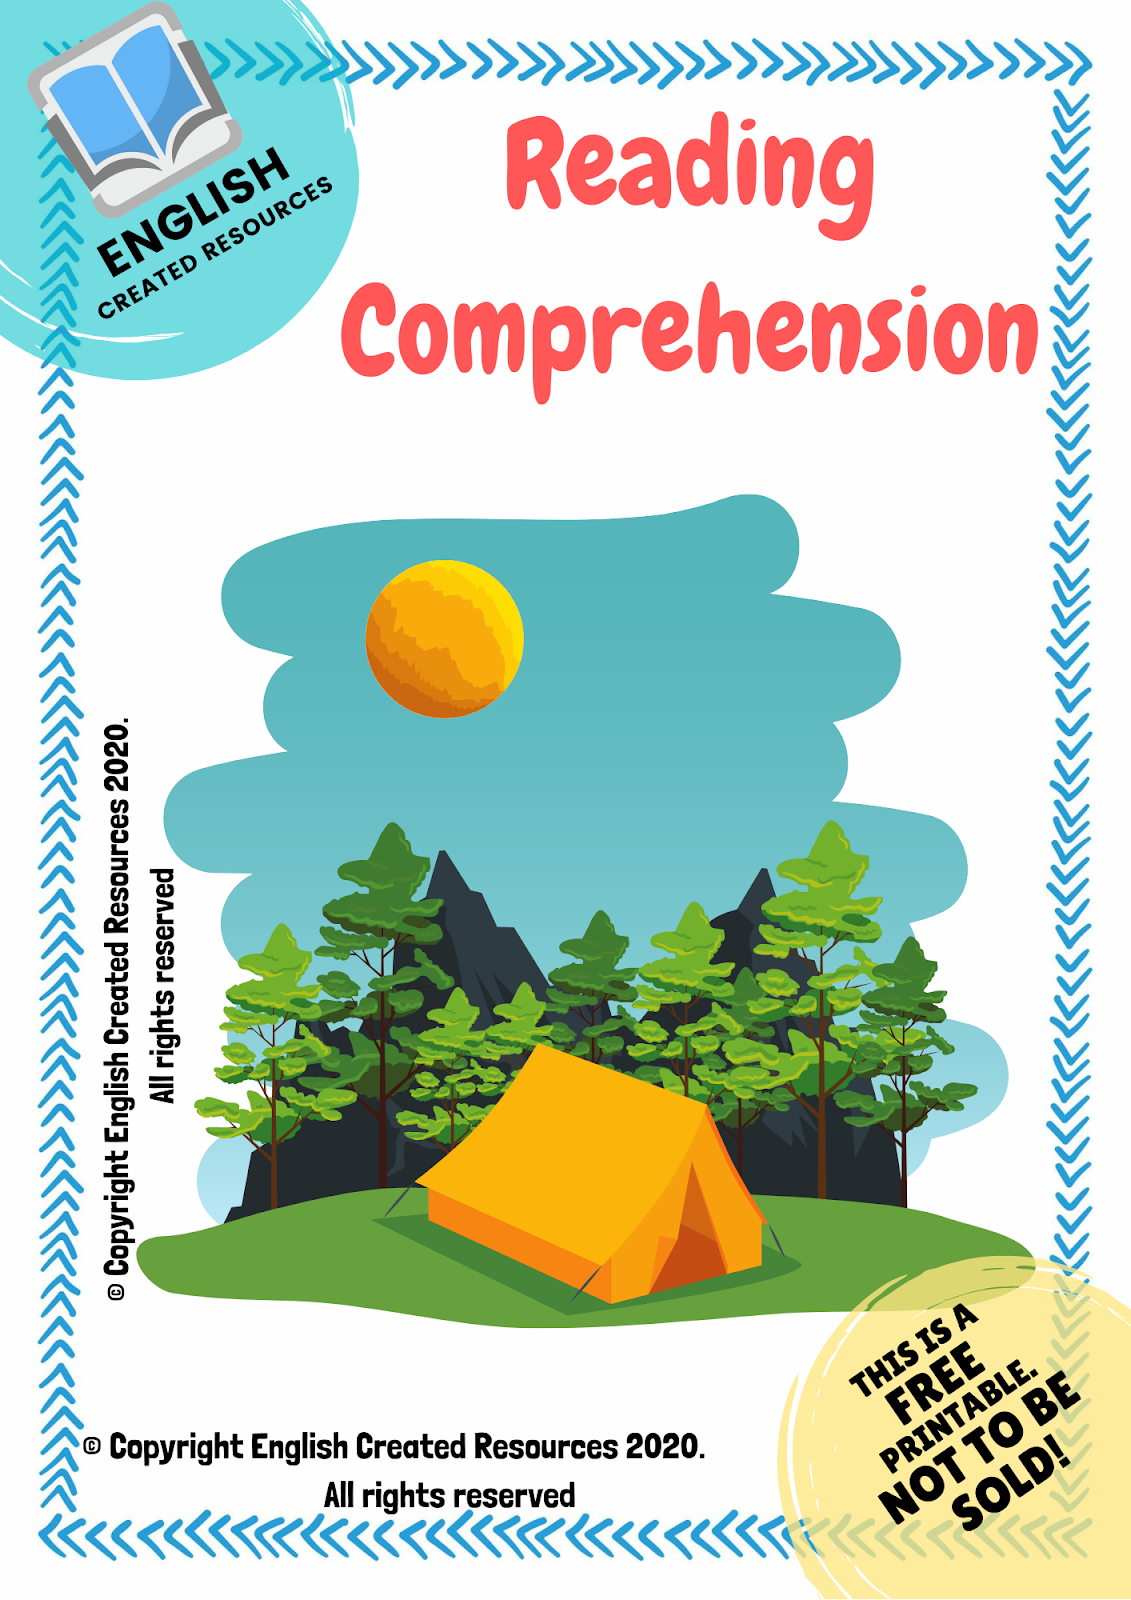 Reading Comprehension Worksheets English Created Resources